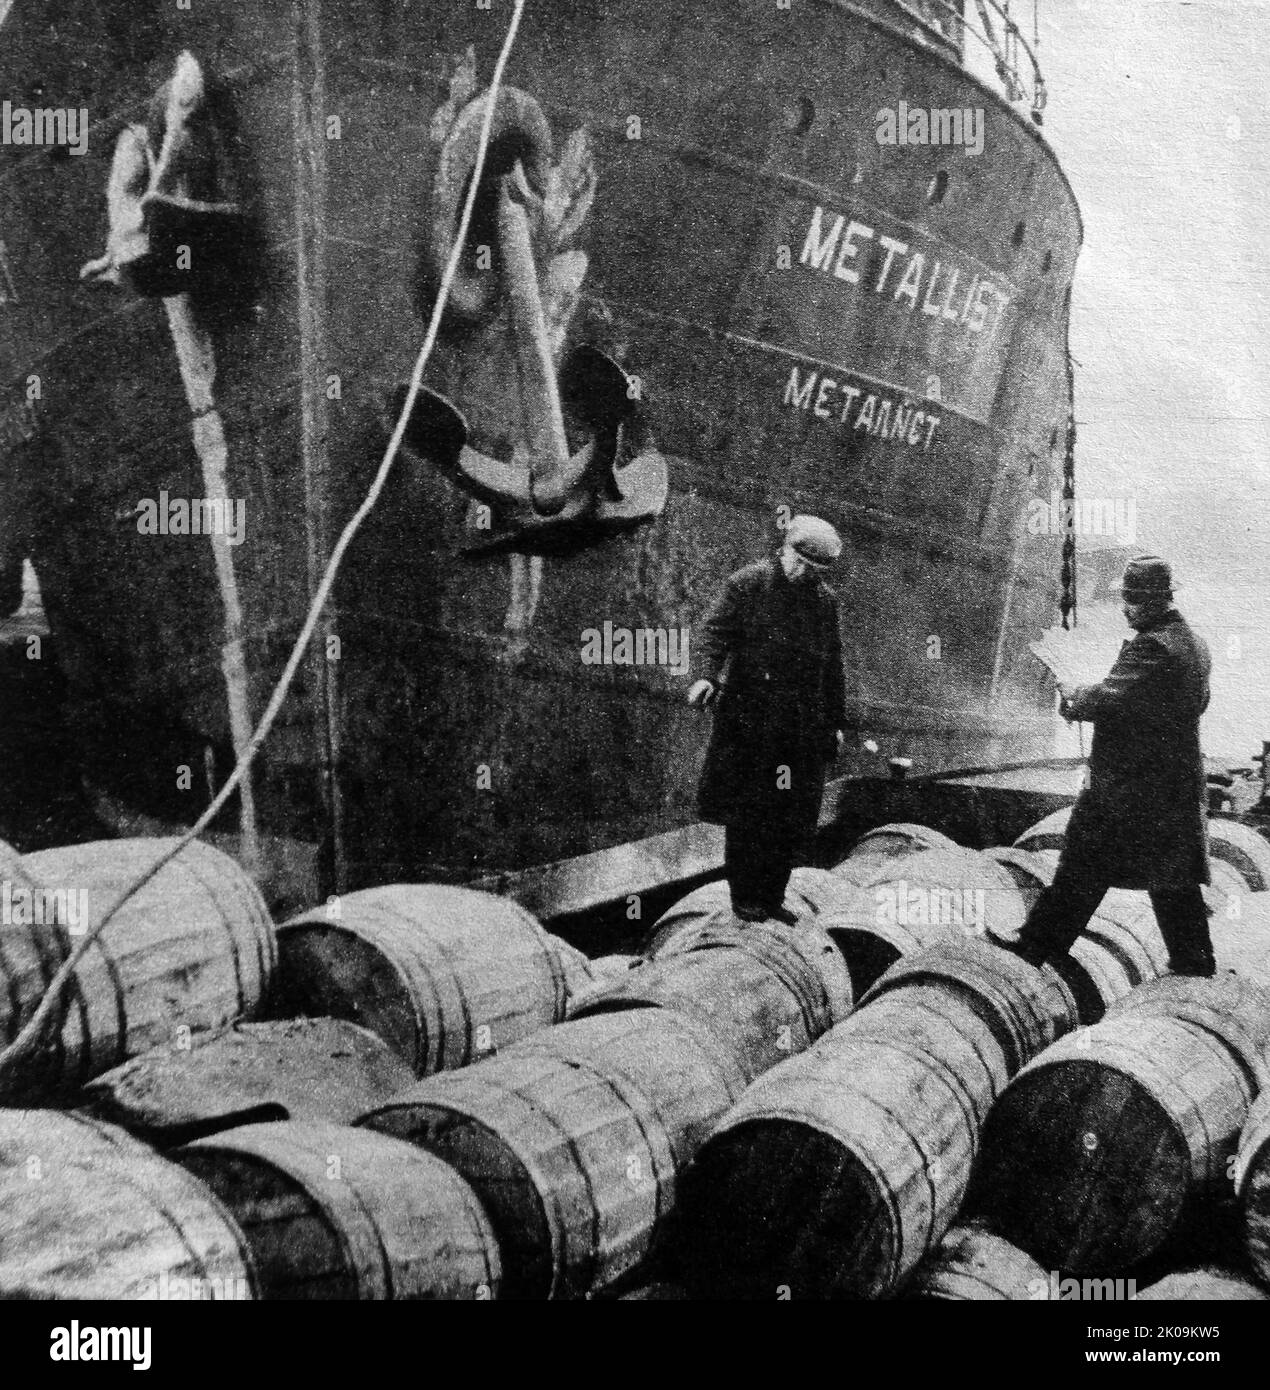 World War II: A customs officer checks on the cargo of the Nazi ship Leander. Disguised as a Russian ship and sailing under an assumed name 'Metallist', she was seized by the British Navy and brought to a British port. Stock Photo